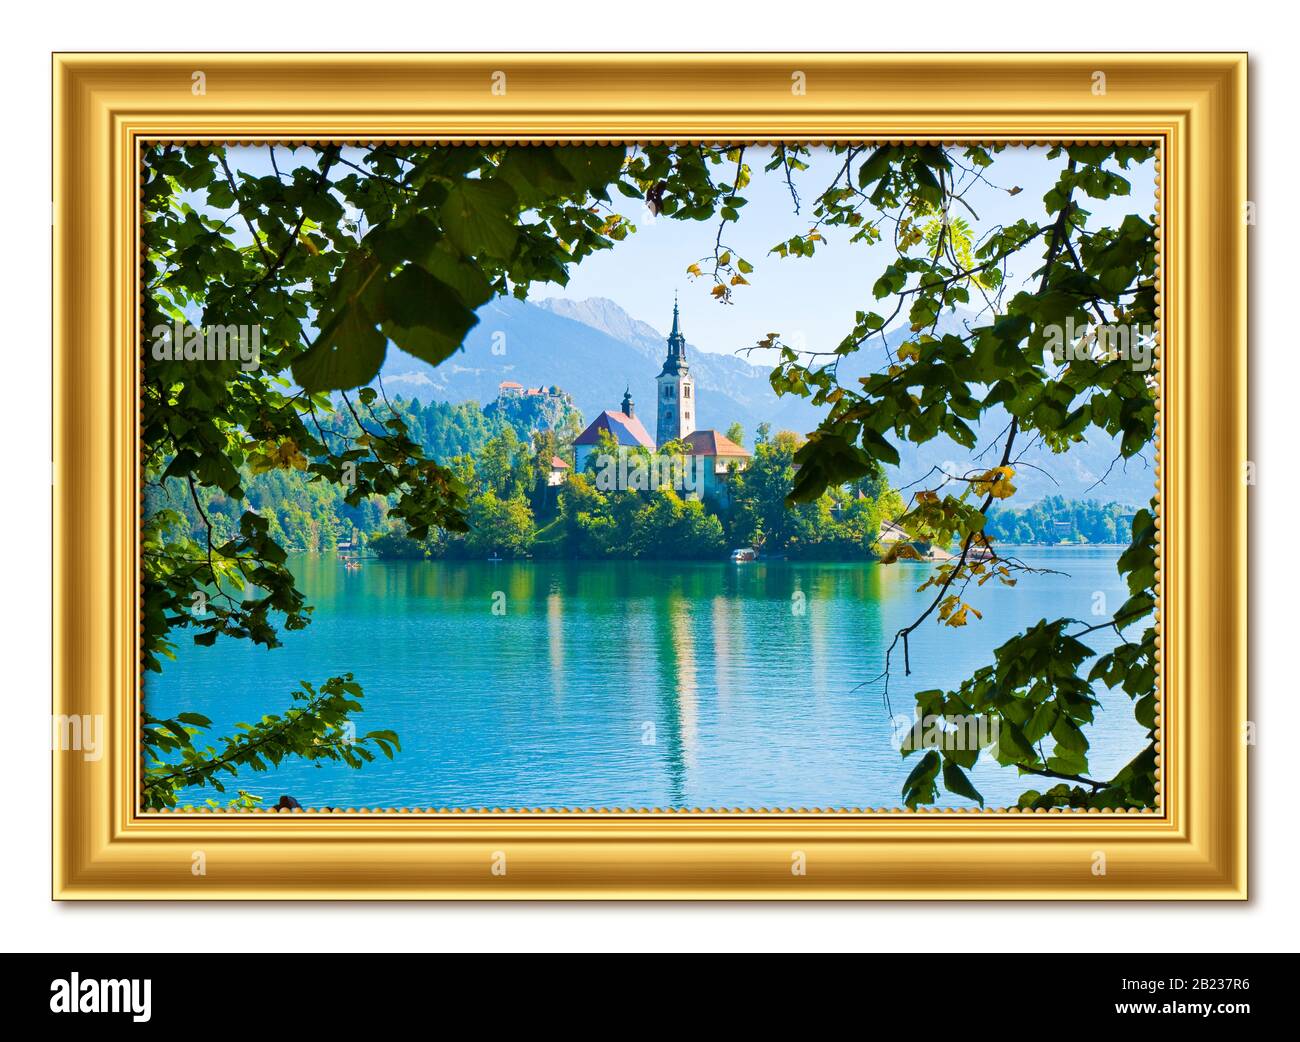 Bled lake, the most famous lake in Slovenia with the island of the church (Europe - Slovenia) - Wooden golden frame concept Stock Photo